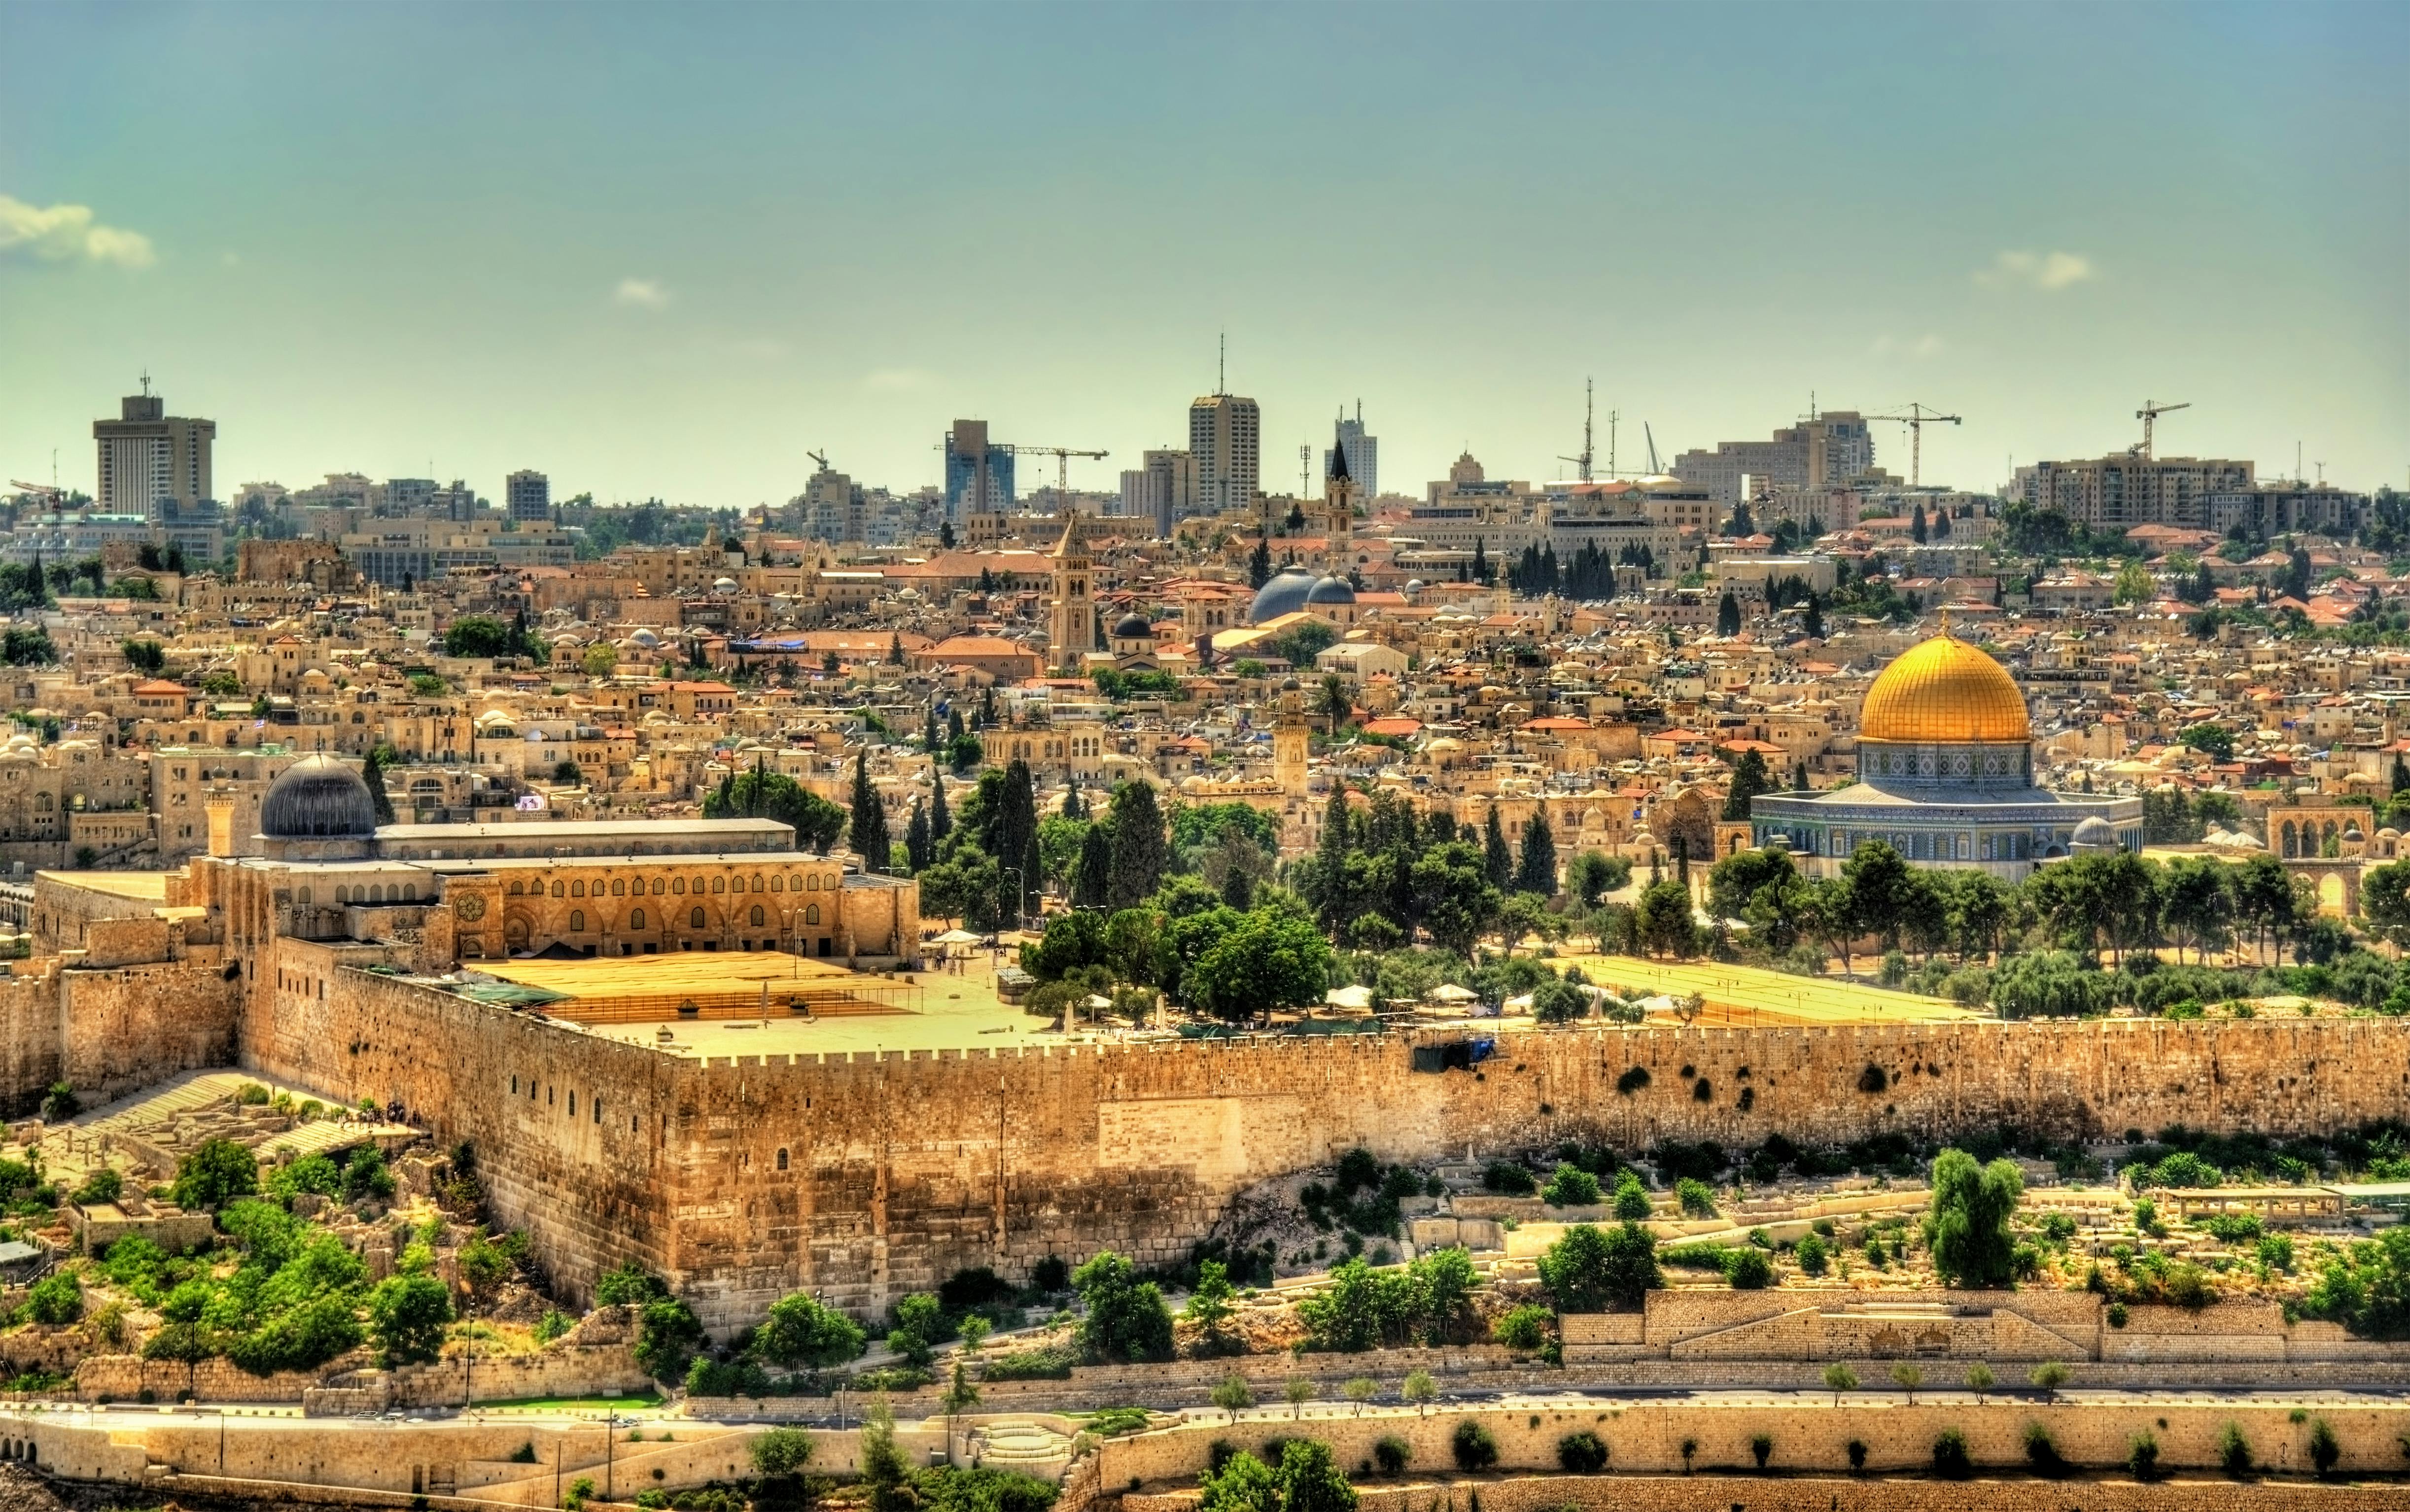 Jerusalem in the footsteps of Jesus from Musement